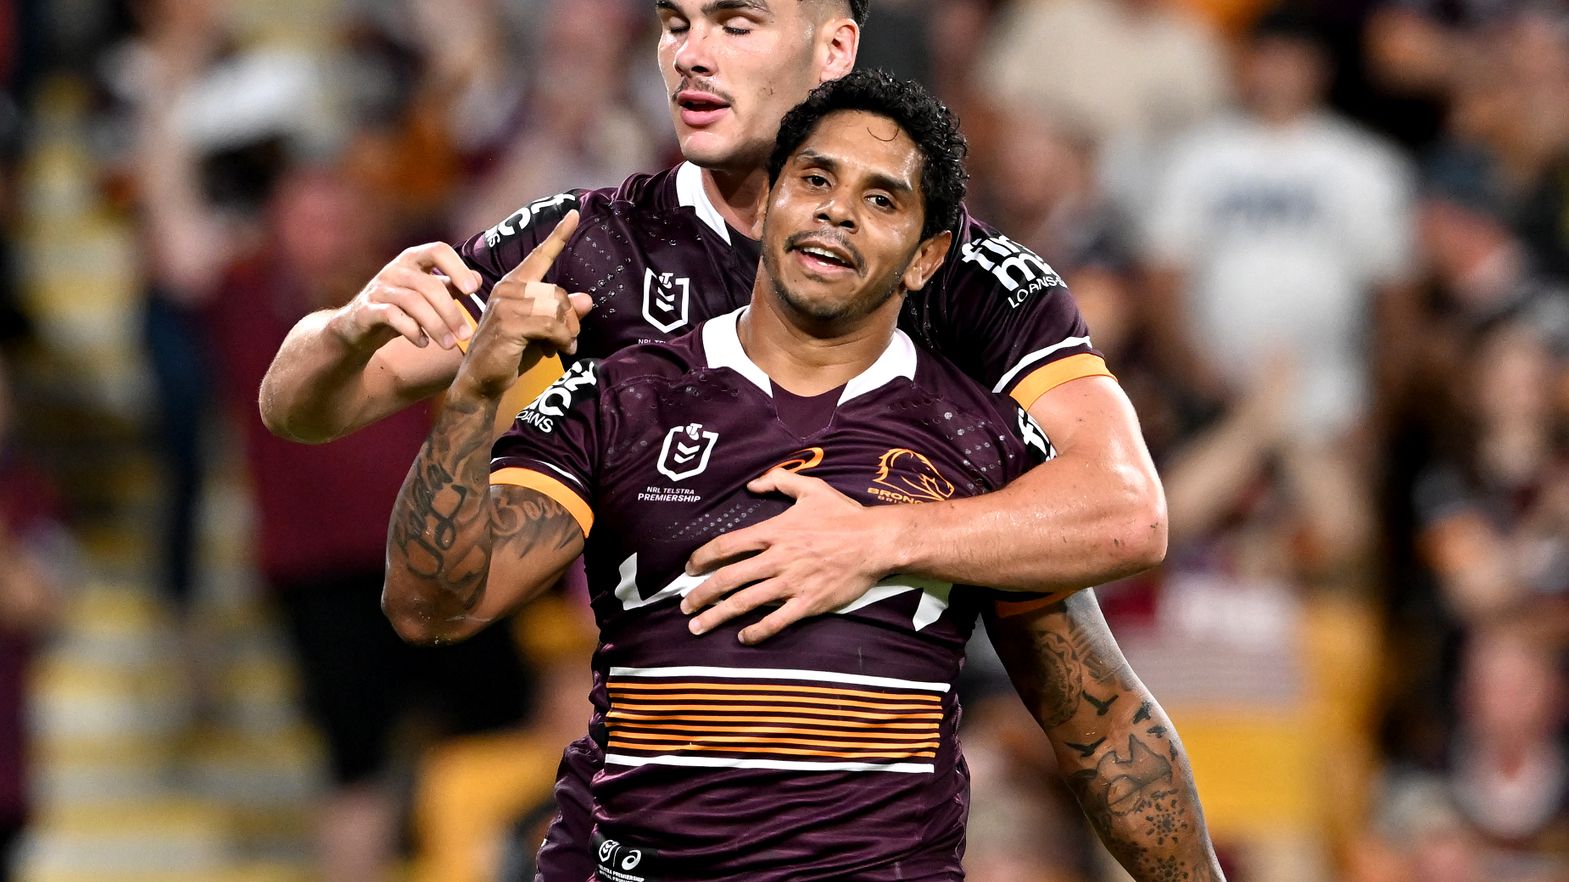 Albert Kelly of the Broncos celebrates scoring a try.